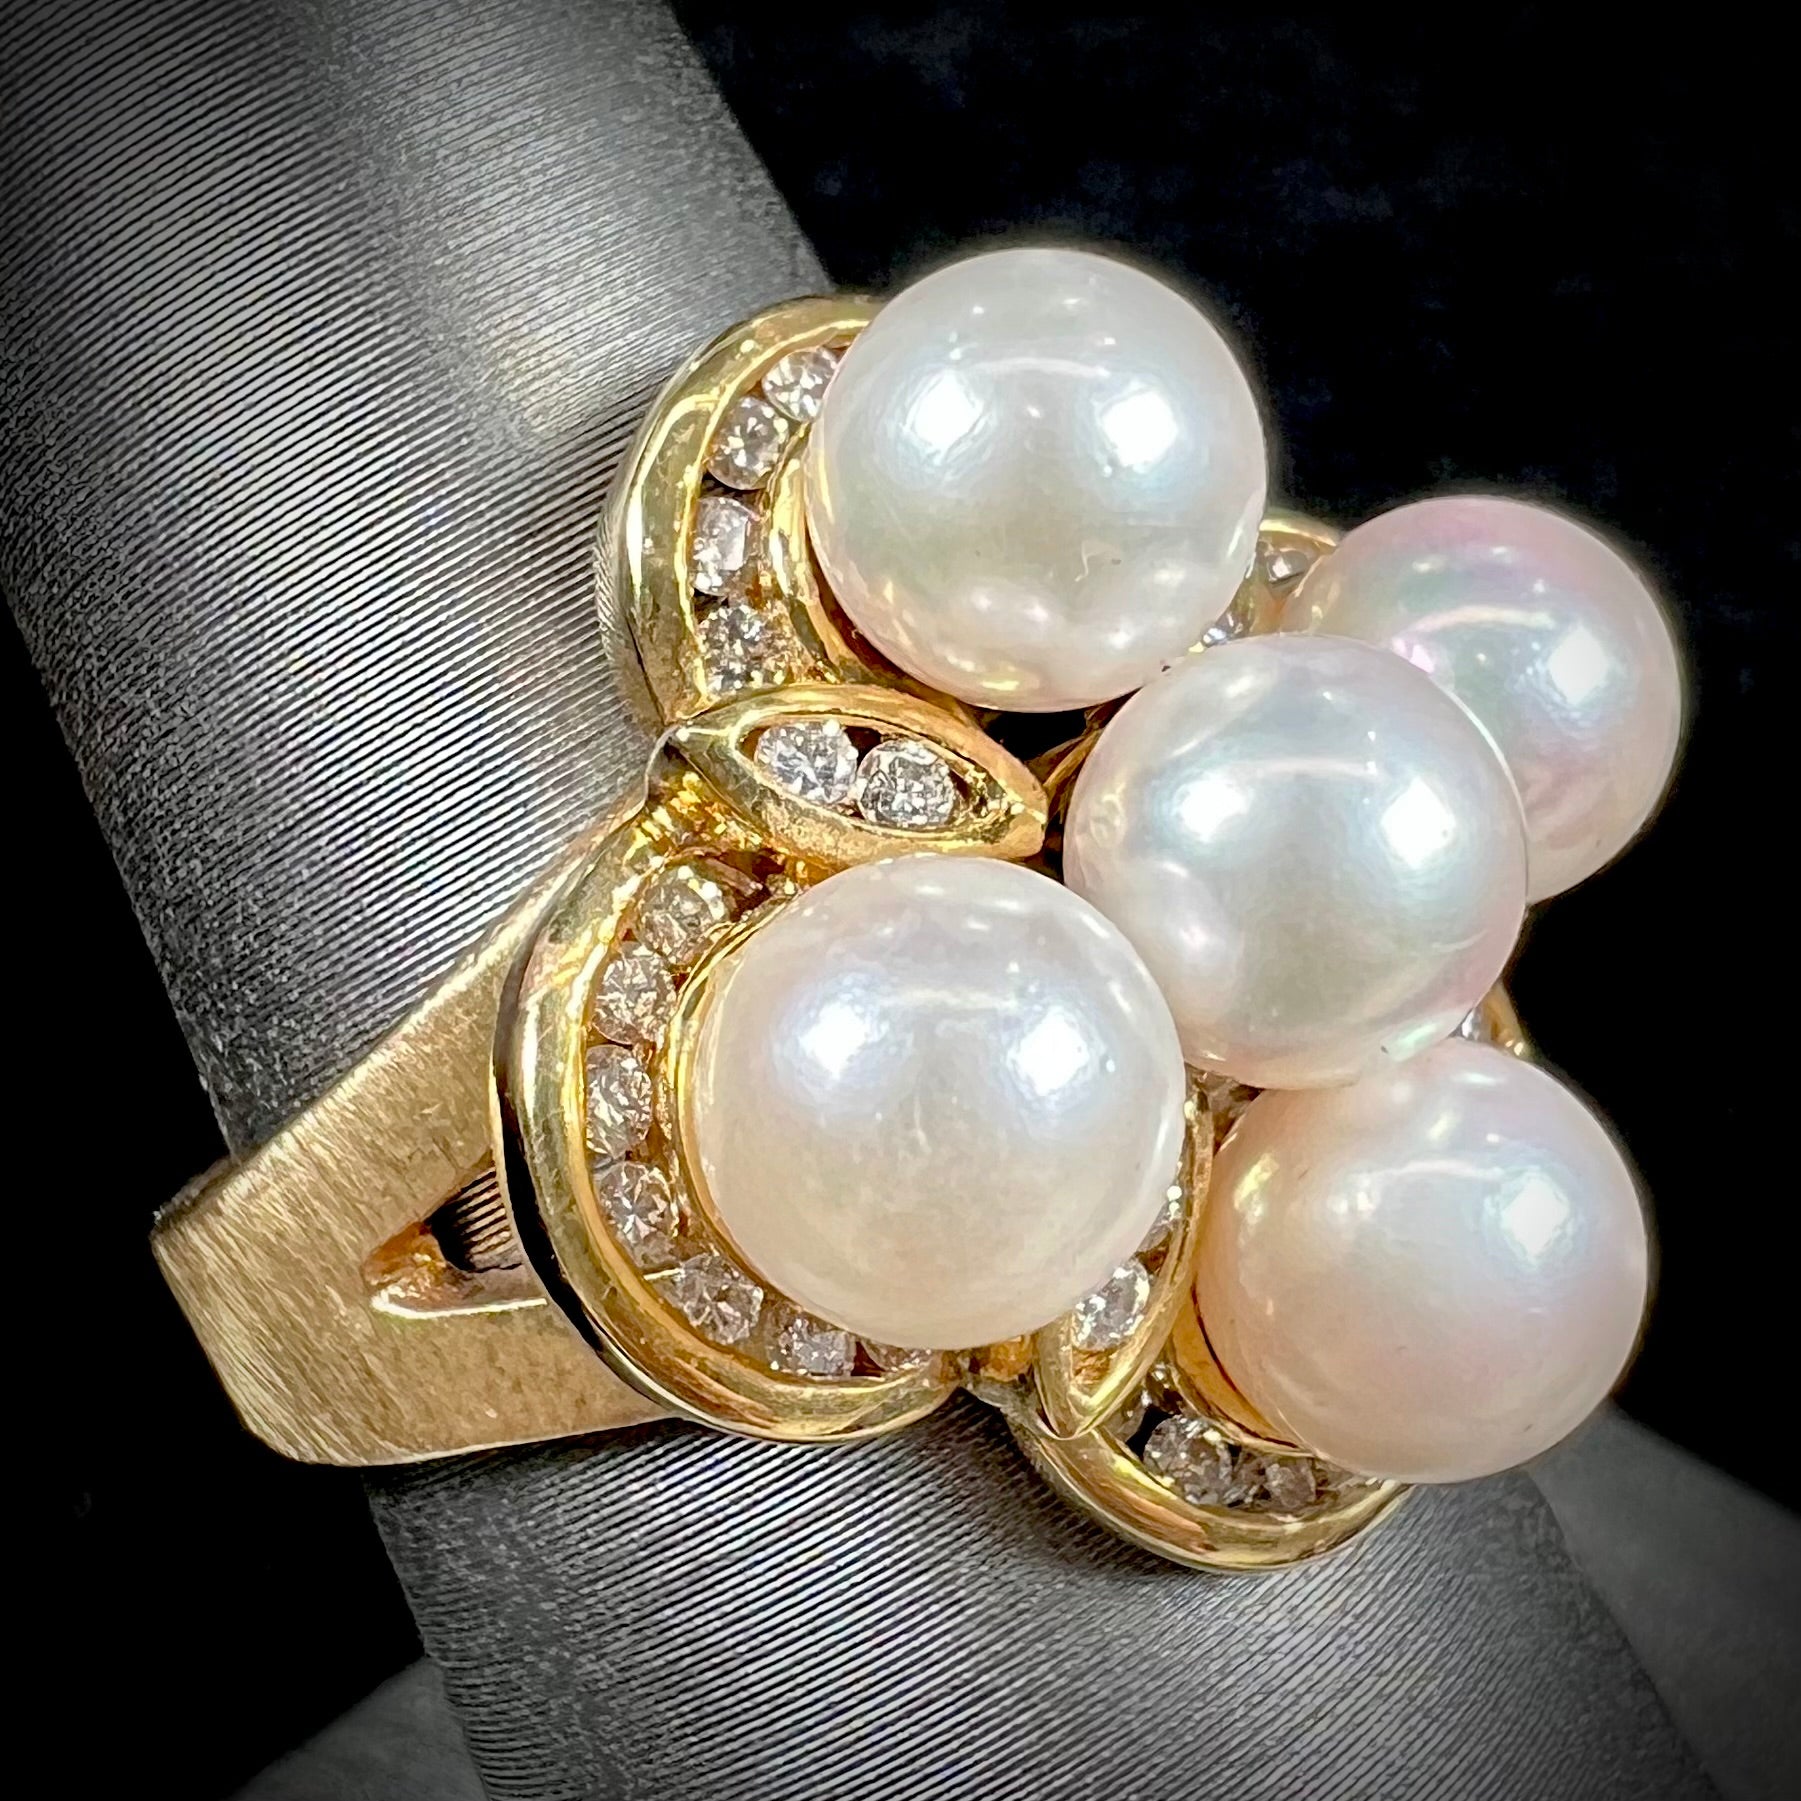 A ladies' vintage 1960's pink Akoya pearl and diamond quatrefoil ring.  The shank of the ring is textured.